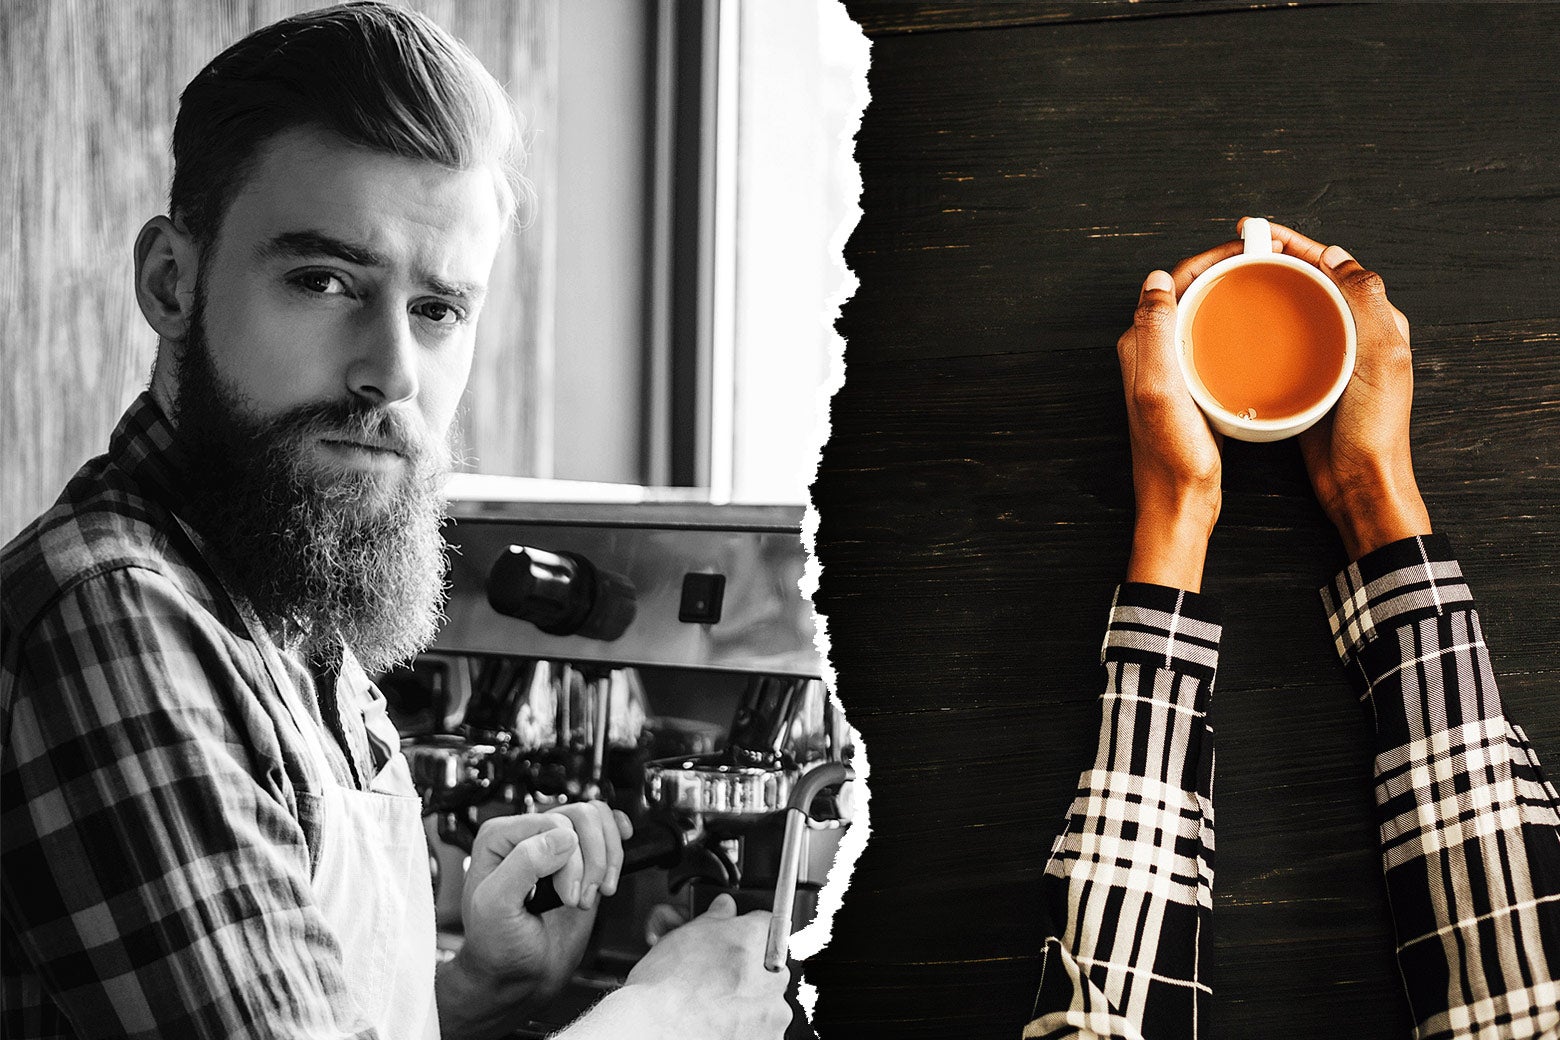 Photo illustration: a man you might implicitly associate with being a barista side-by-side with an image of a cup of coffee.